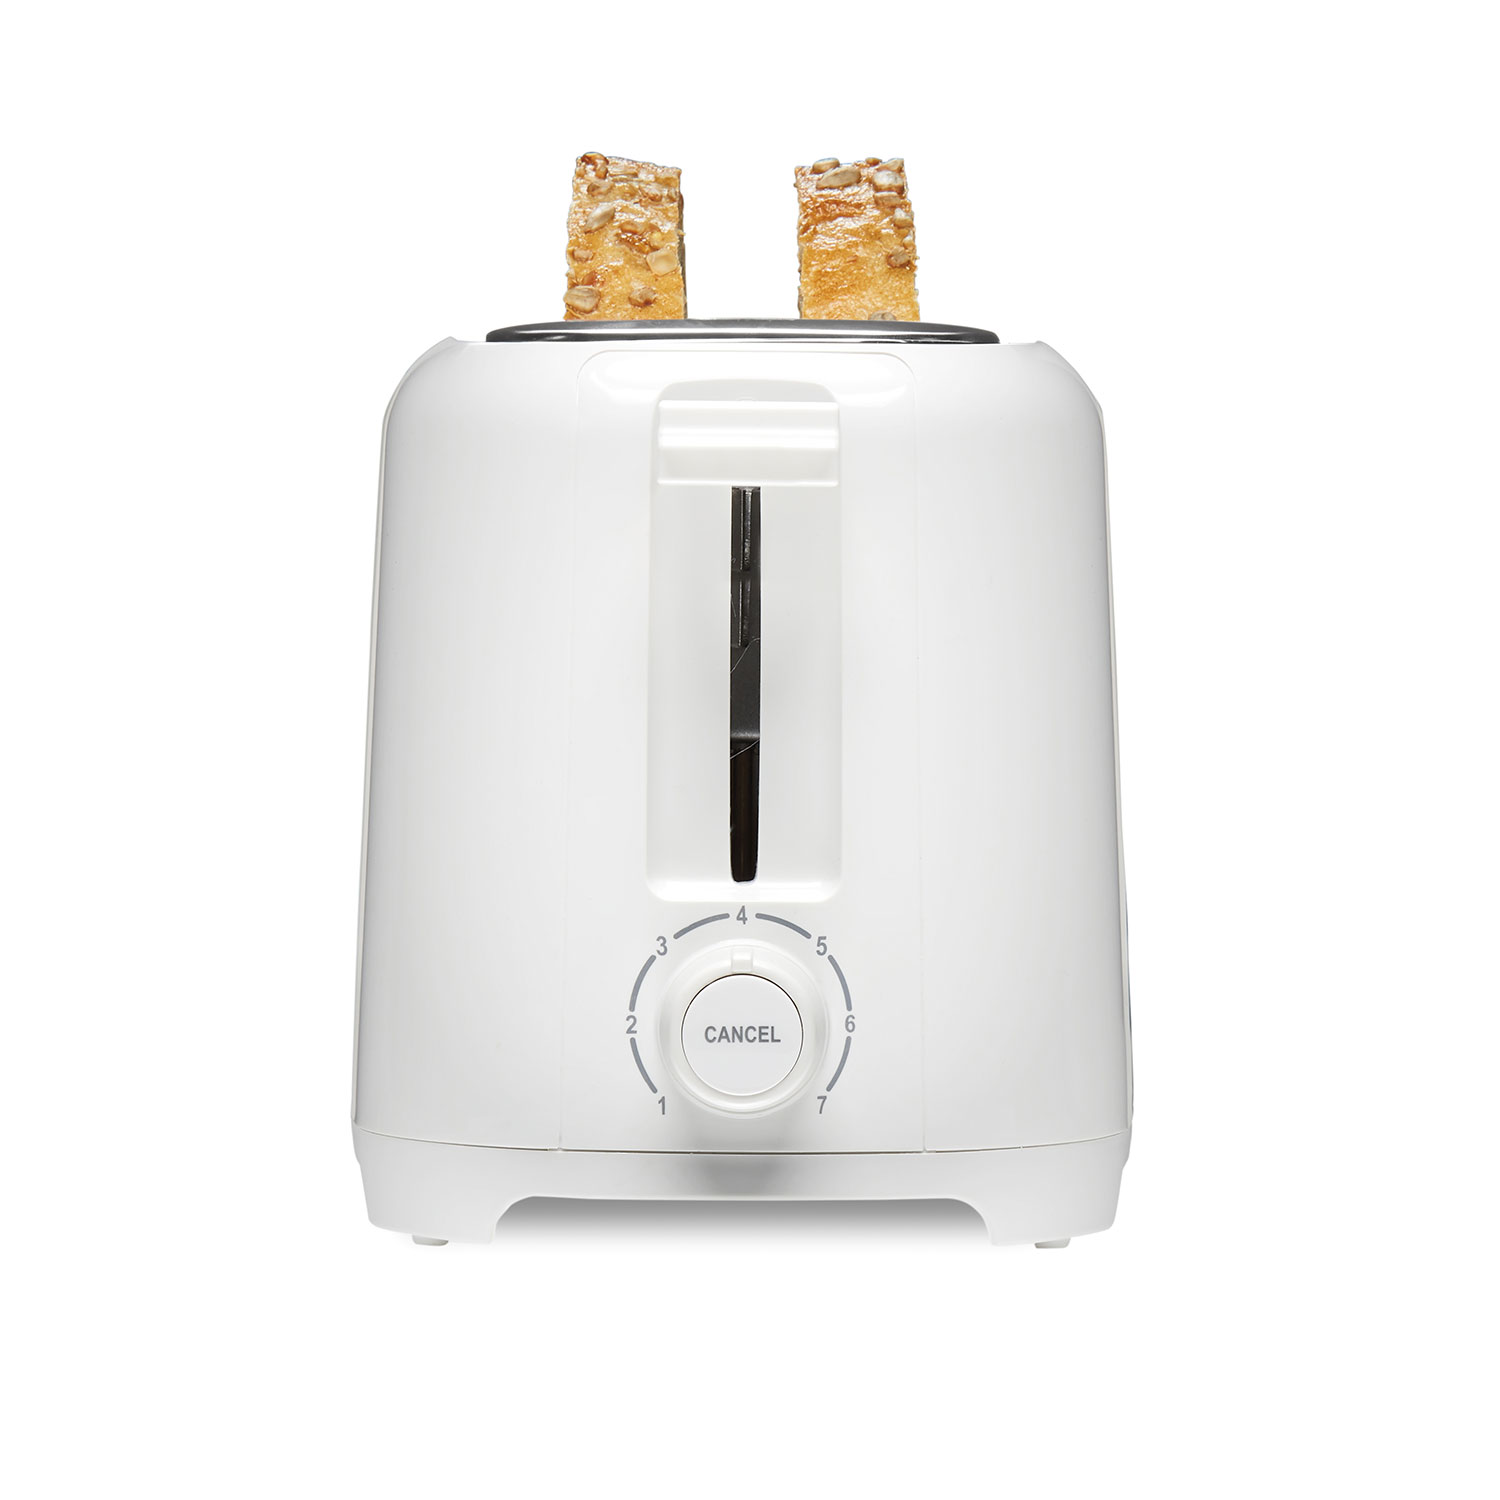 Wide-Slot 2 Slice Toaster, White - 22216PS Small Size